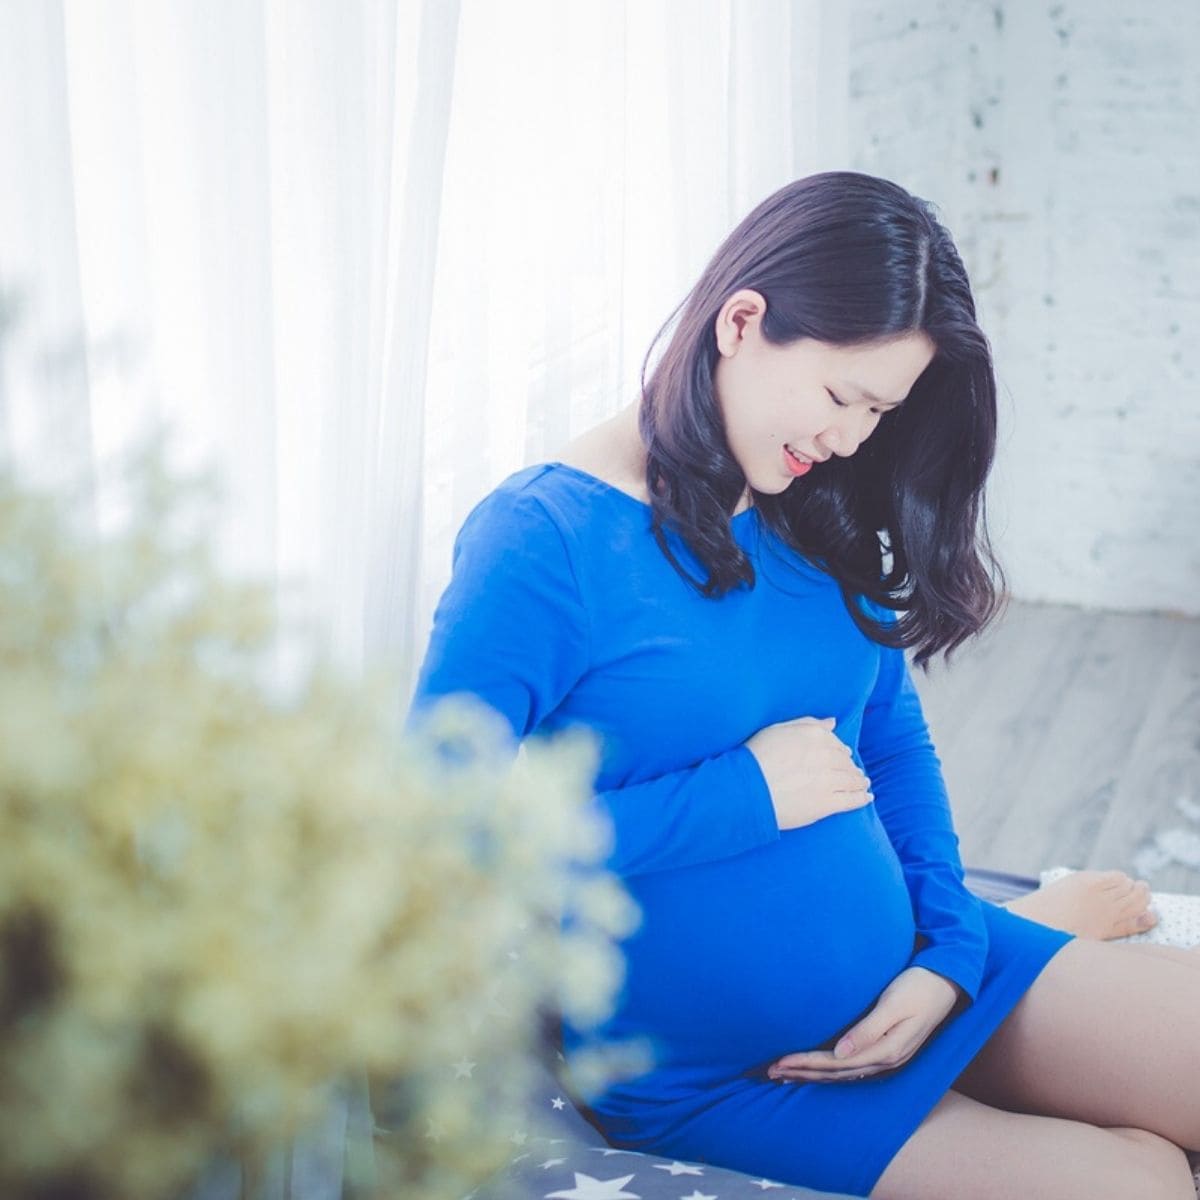 pregnant woman is wearing a blue dress and looking down at her pregnant belly